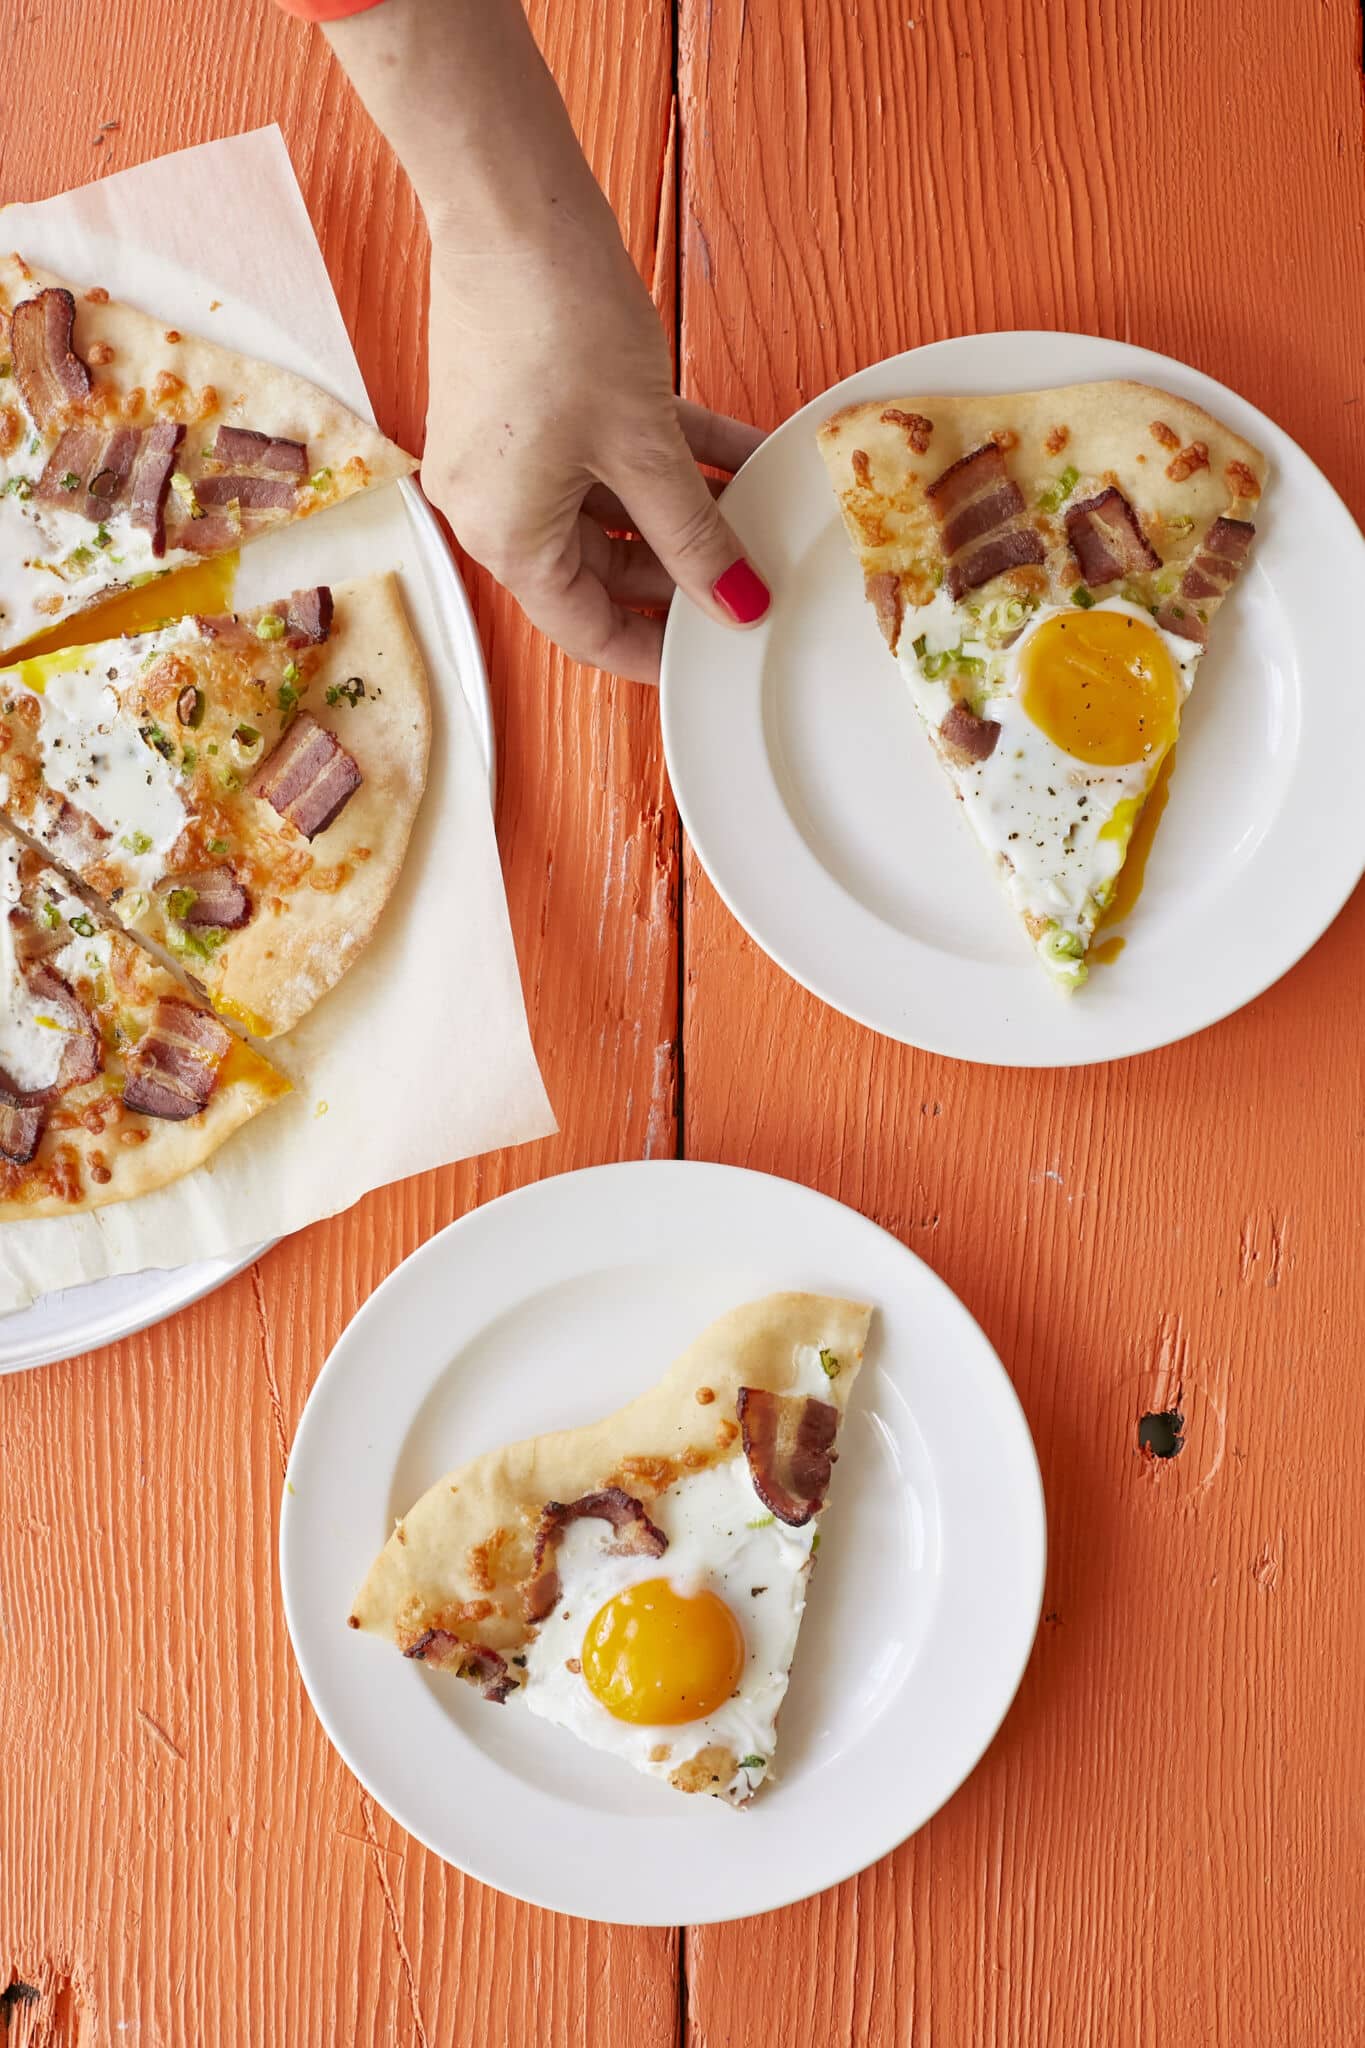 Wholesome breakfast pizza has golden and crispy crust, with smoky bacon, green onions, and sunny-side-up eggs bringing layers of savory flavor. It's sliced and served on two small plates. 